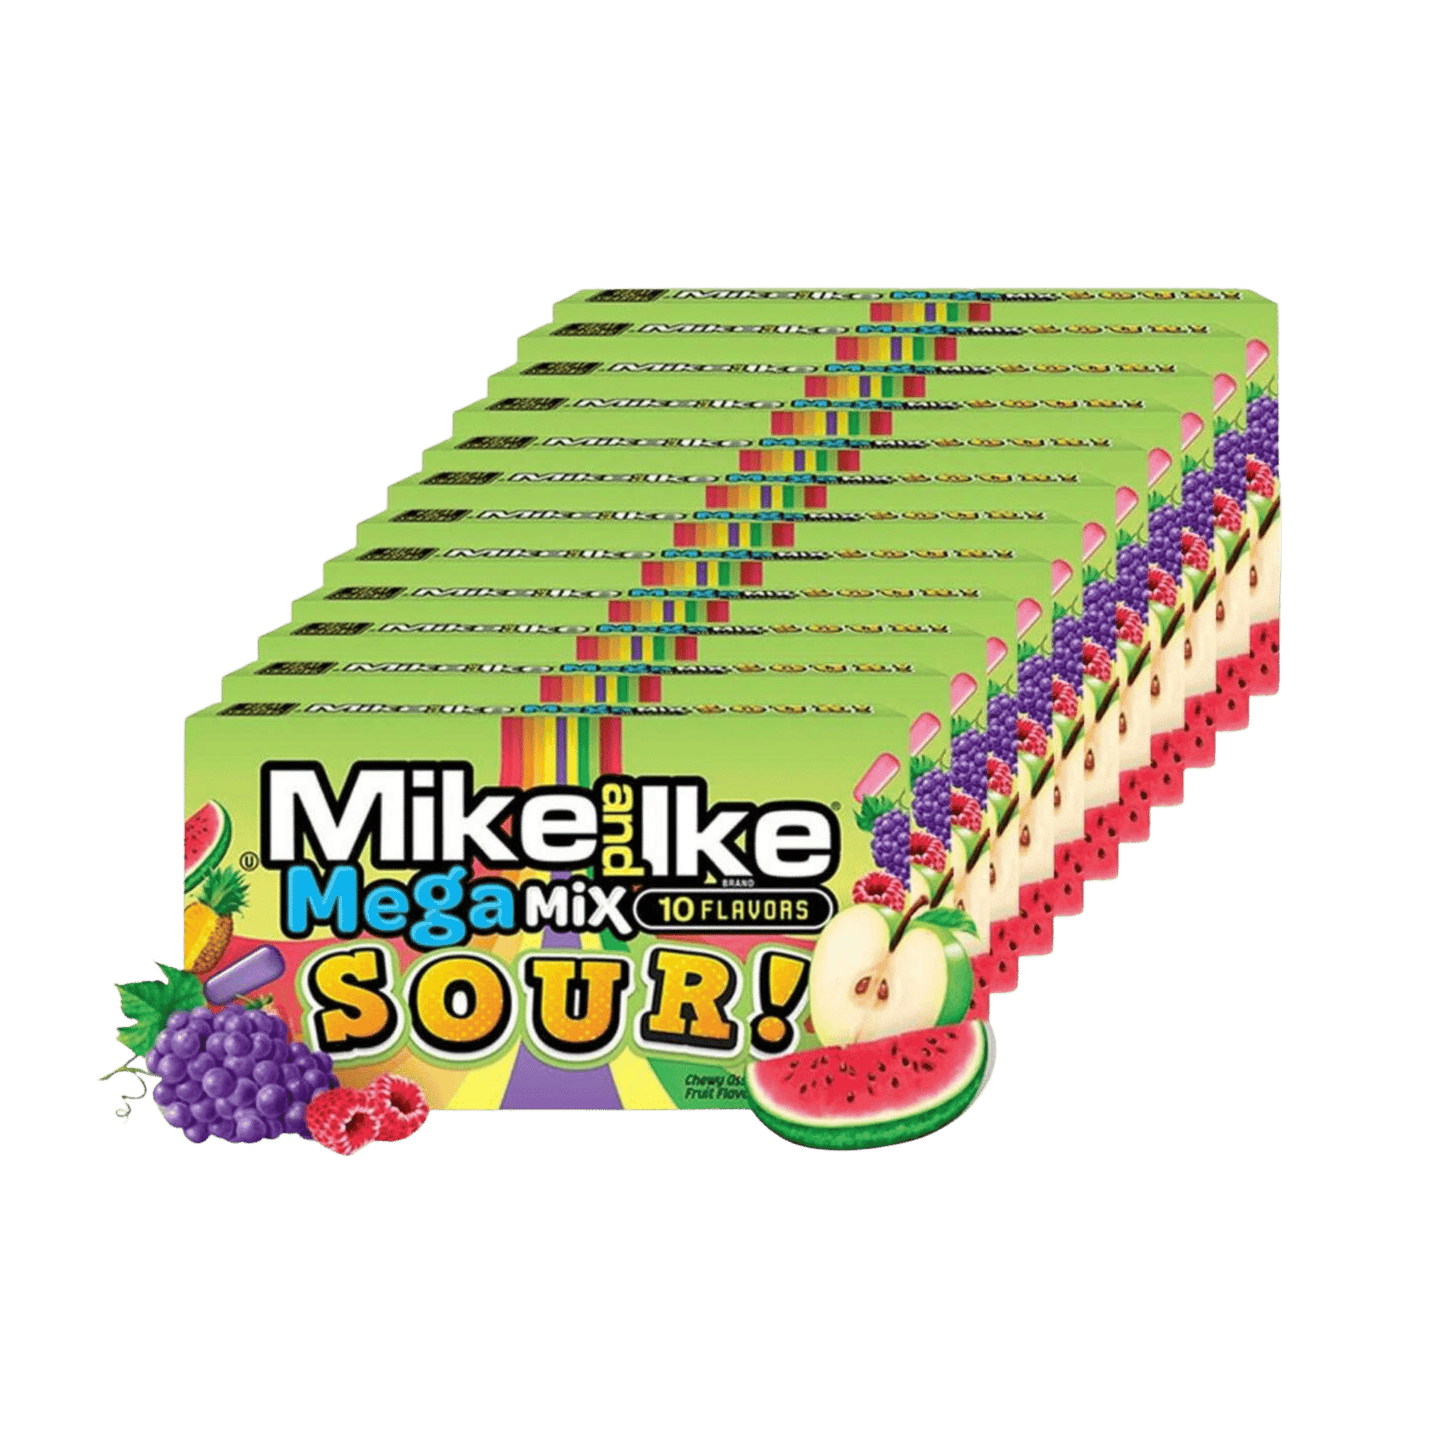 Mike and Ike - Megamix sour - Theater Box (12)